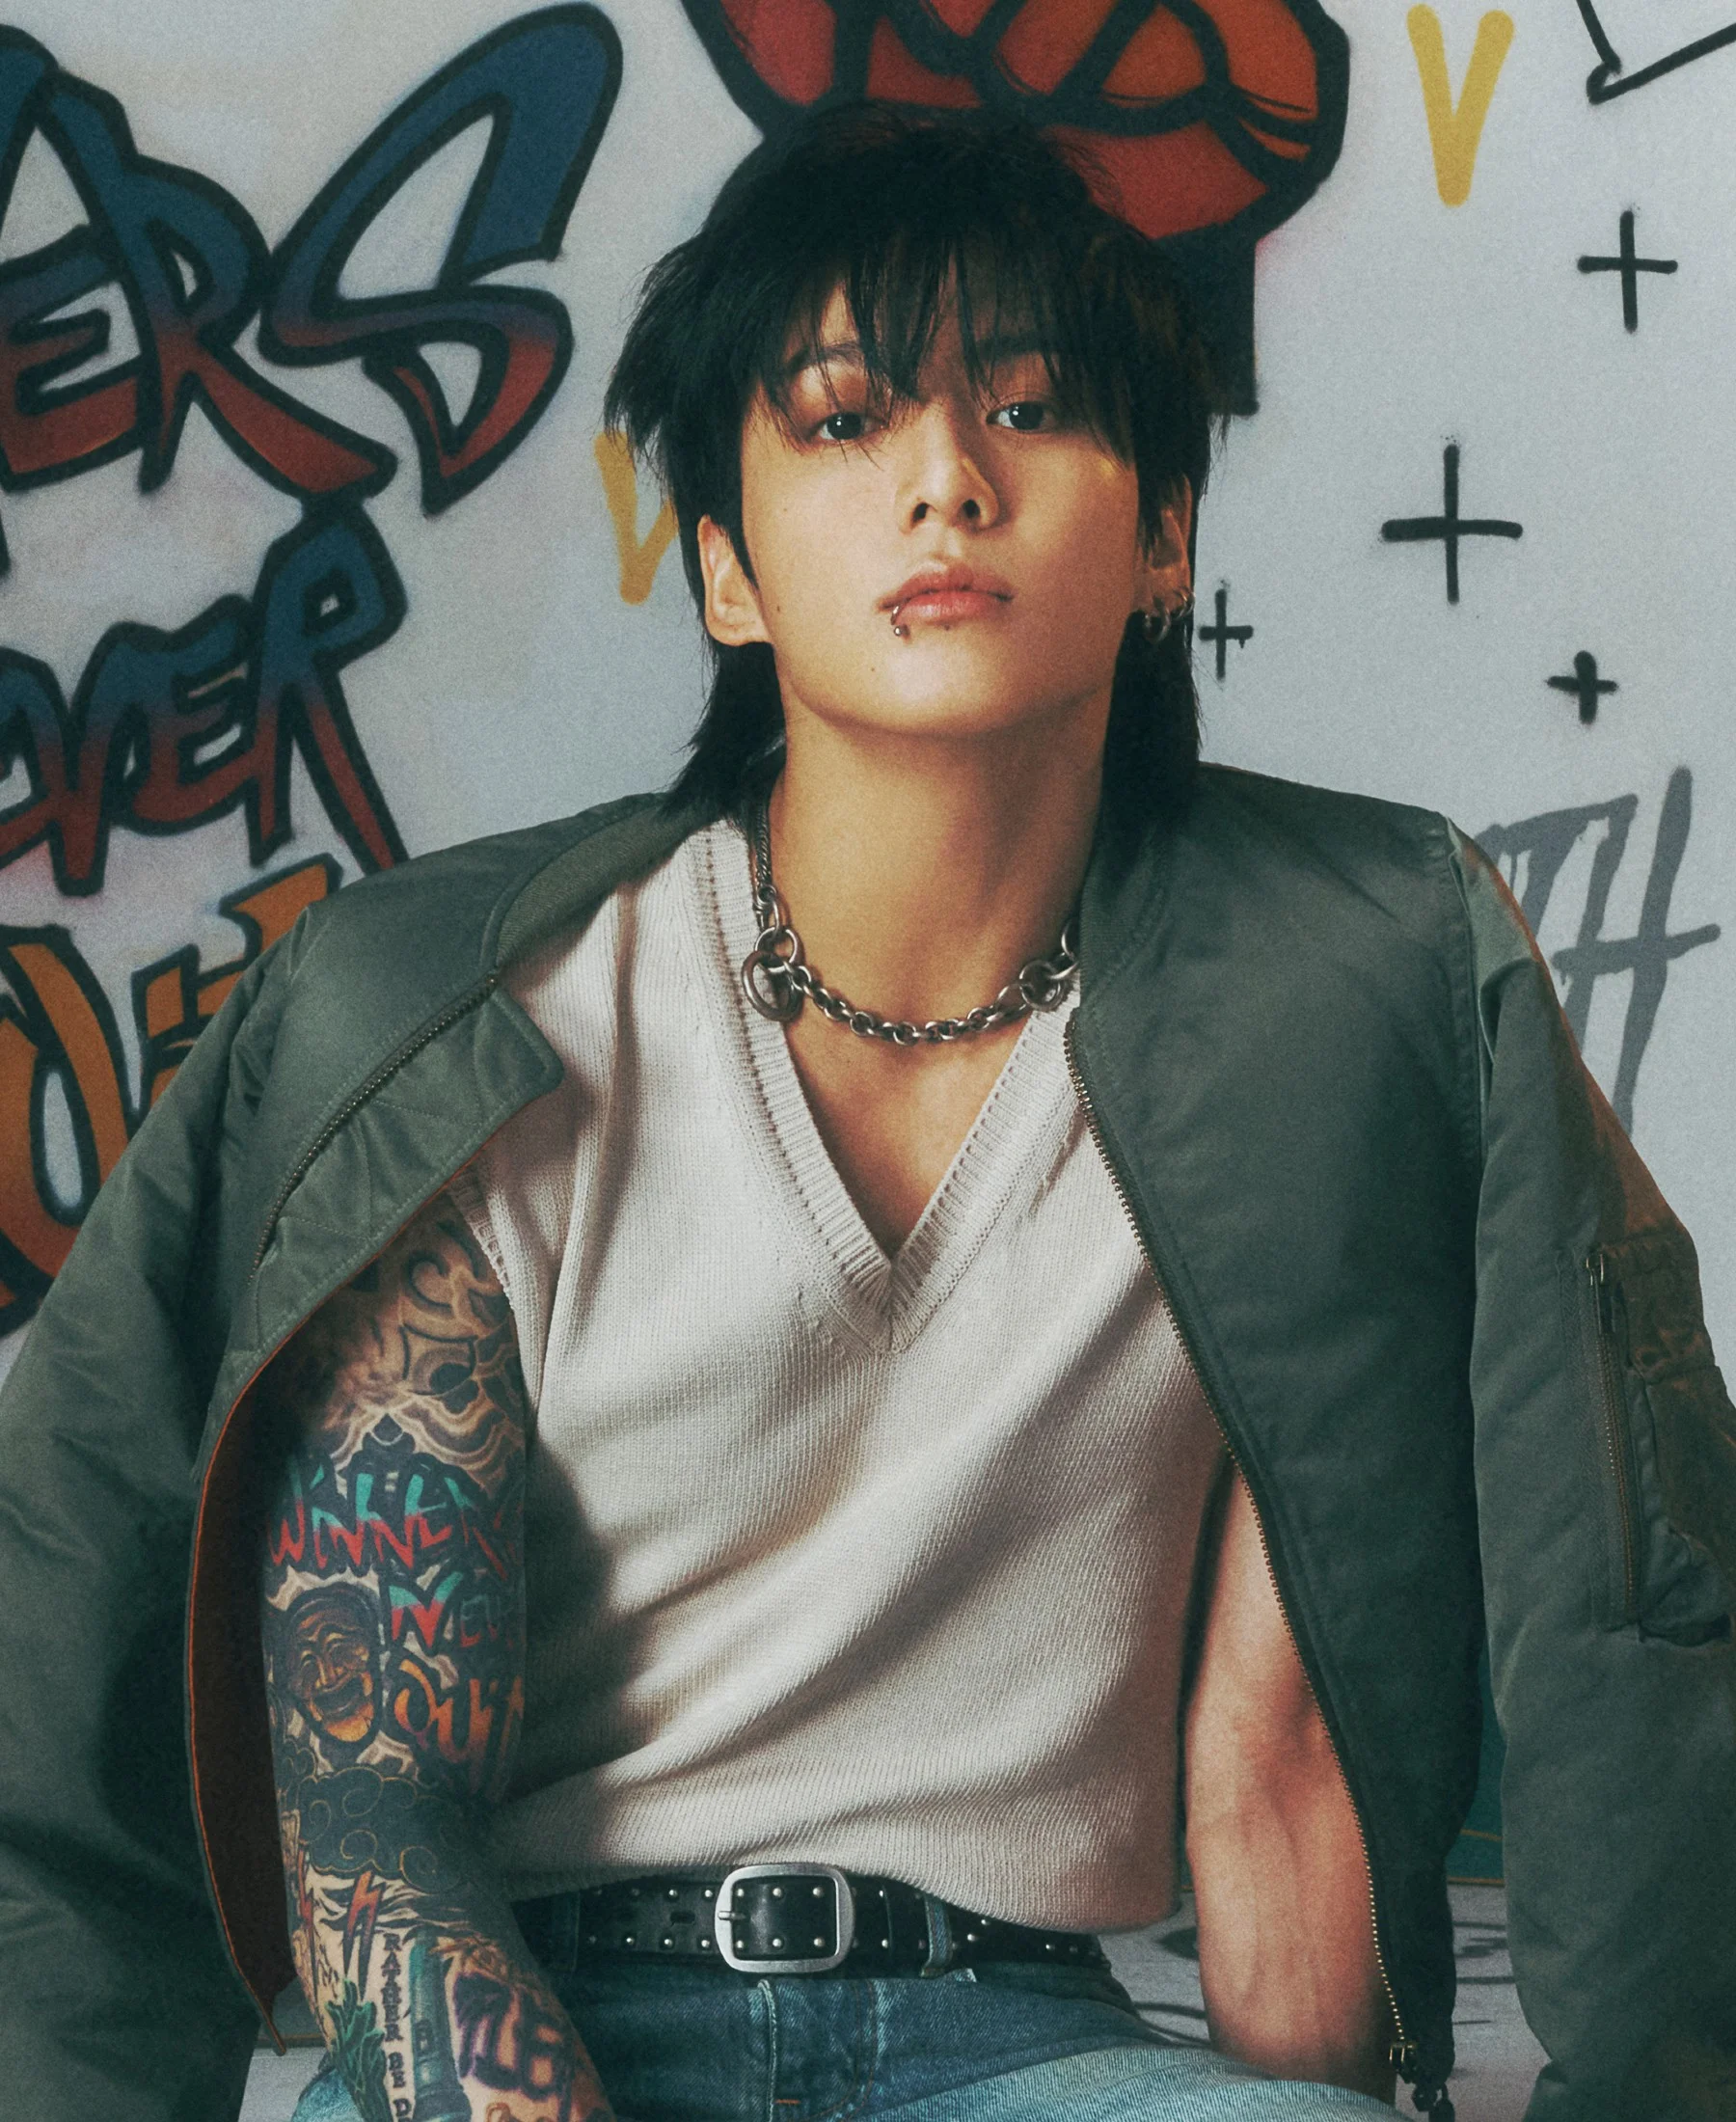 BTS Jungkook's Vogue Korea Photoshoot Embracing Punk Style From The '70s  Sets ARMY's Hearts Racing